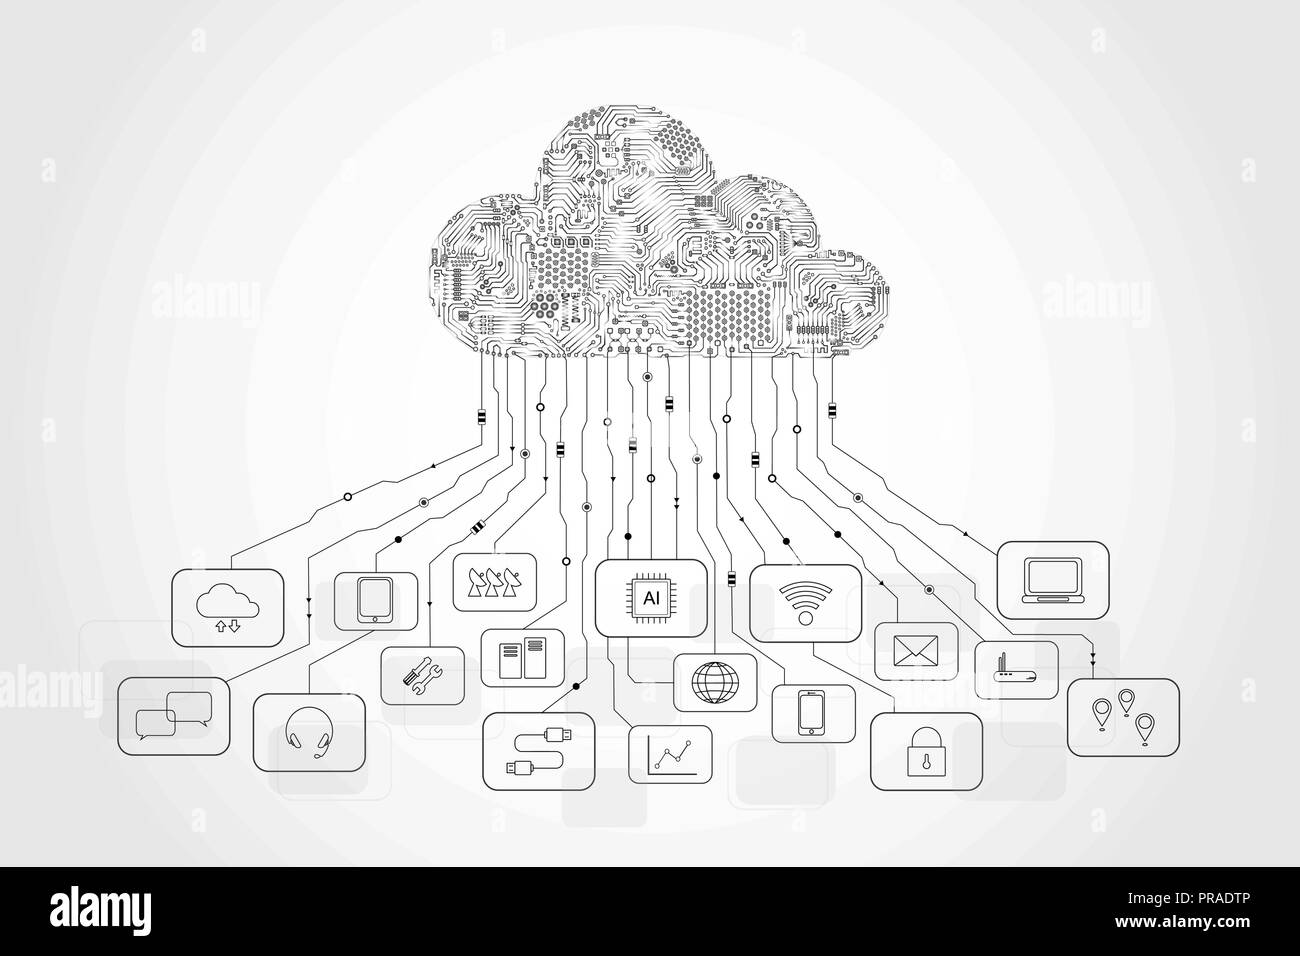 Cloud Computing Technology With Icons Vector Illustration Stock Vector